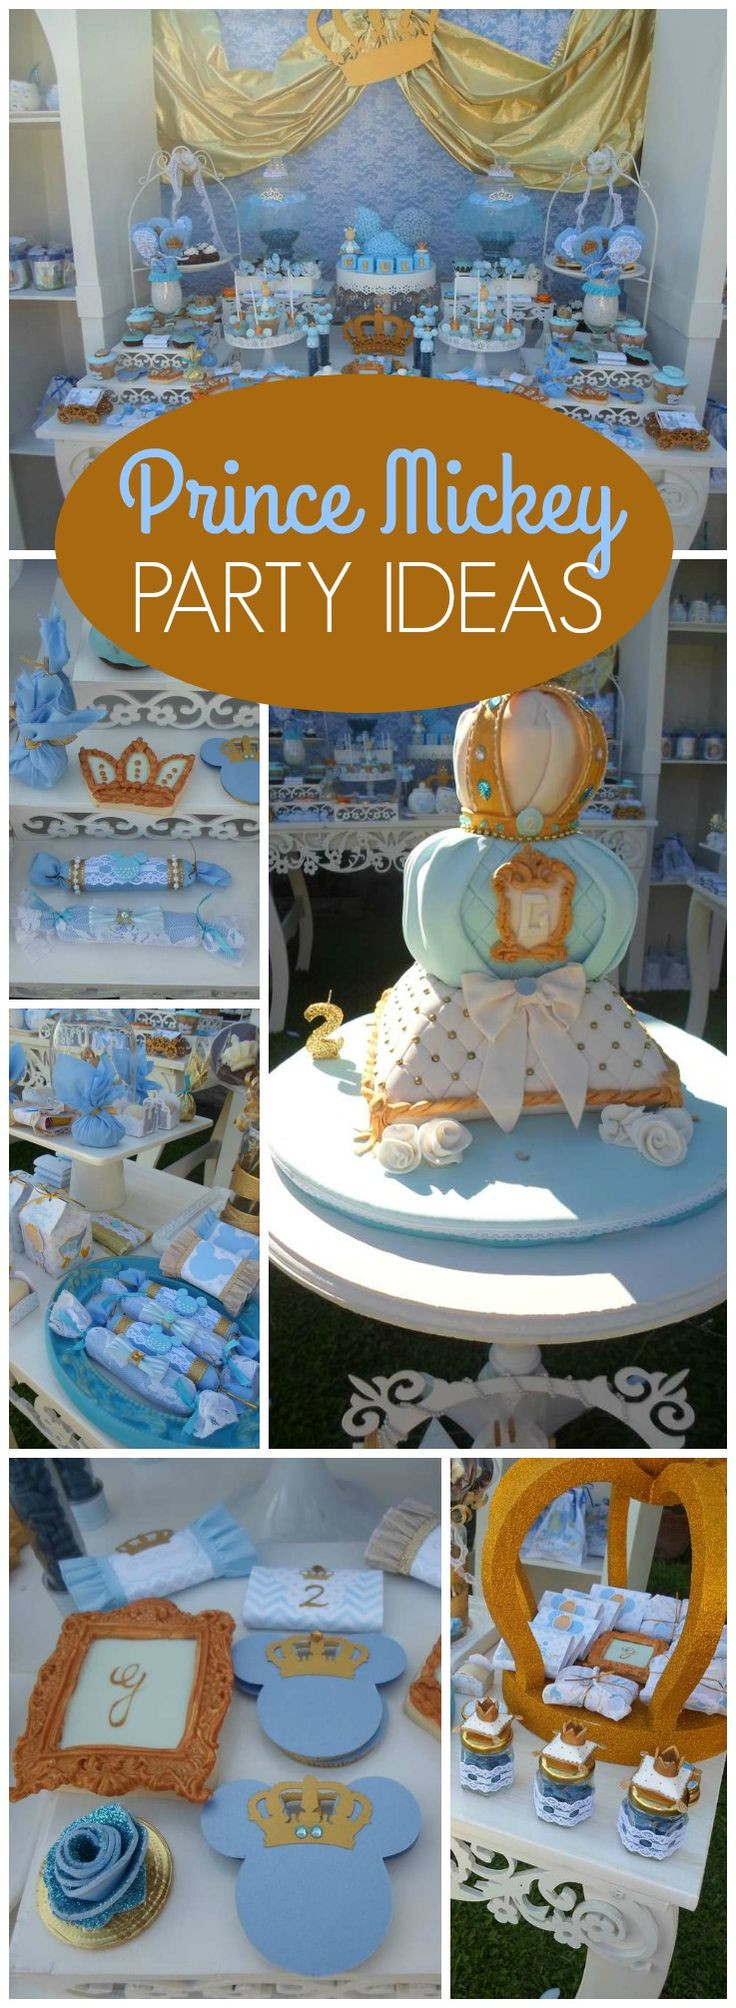 Prince Birthday Decorations
 60 best images about Royal Prince on Pinterest